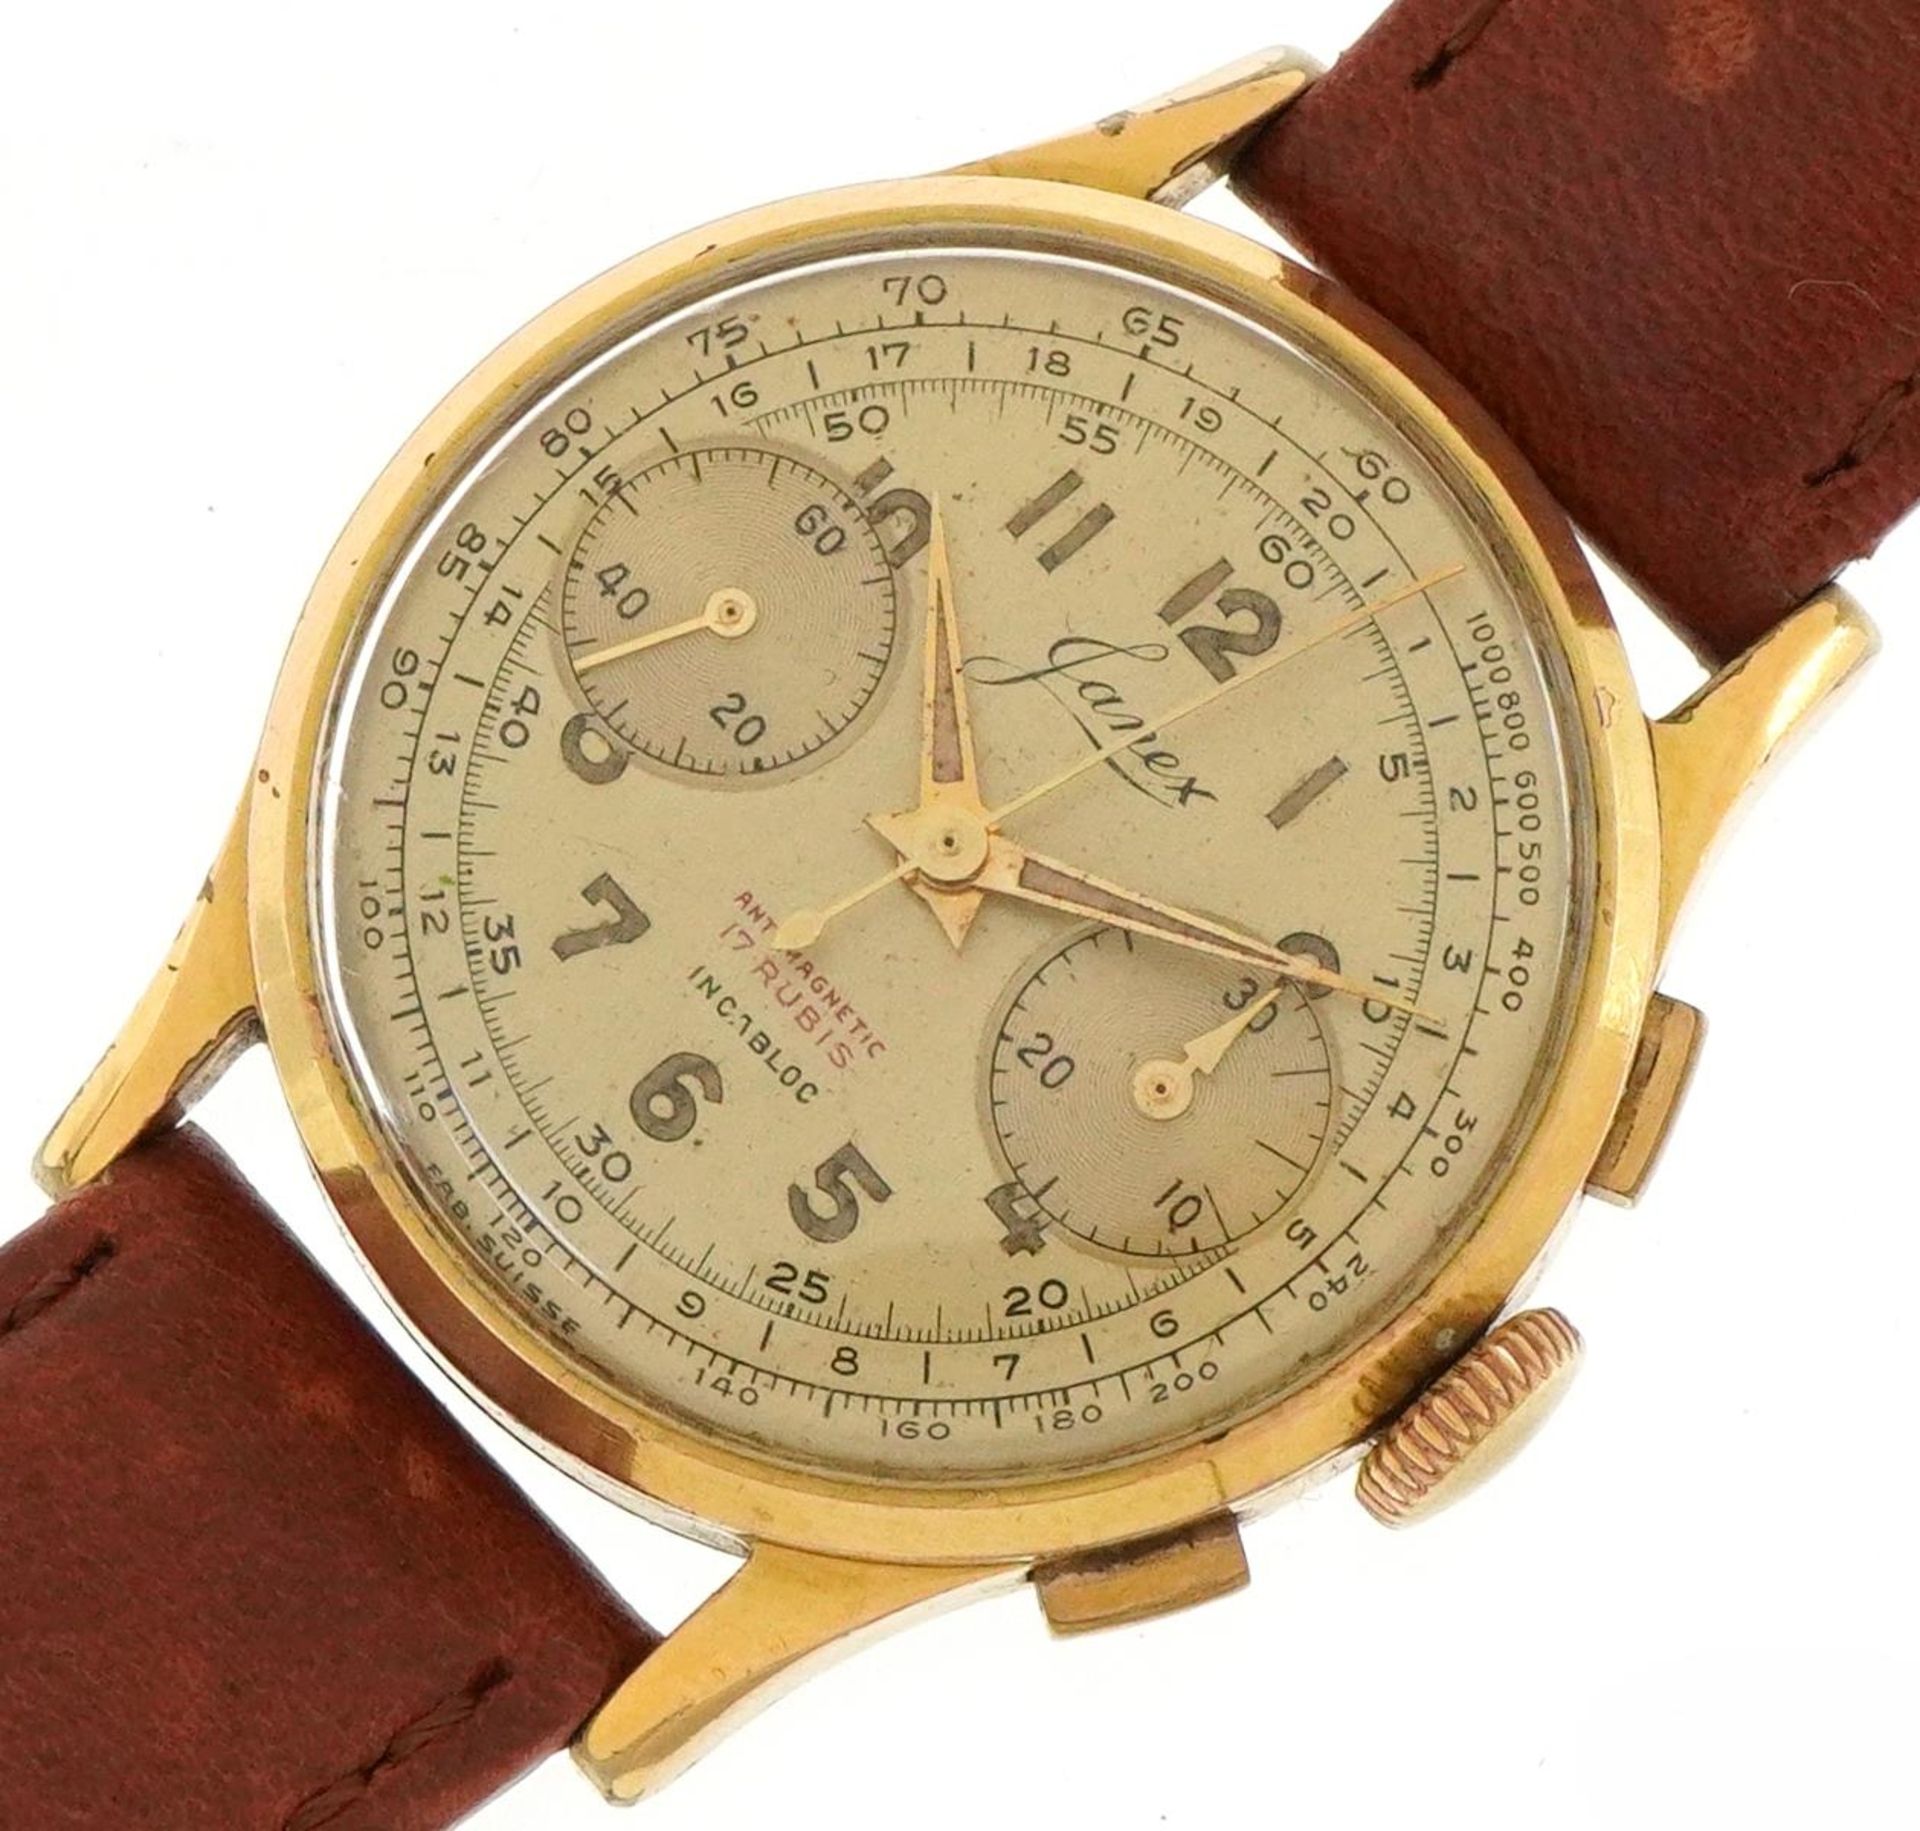 Janex, gentlemen's manual wind chronograph wristwatch having champagne and subsidiary dials with